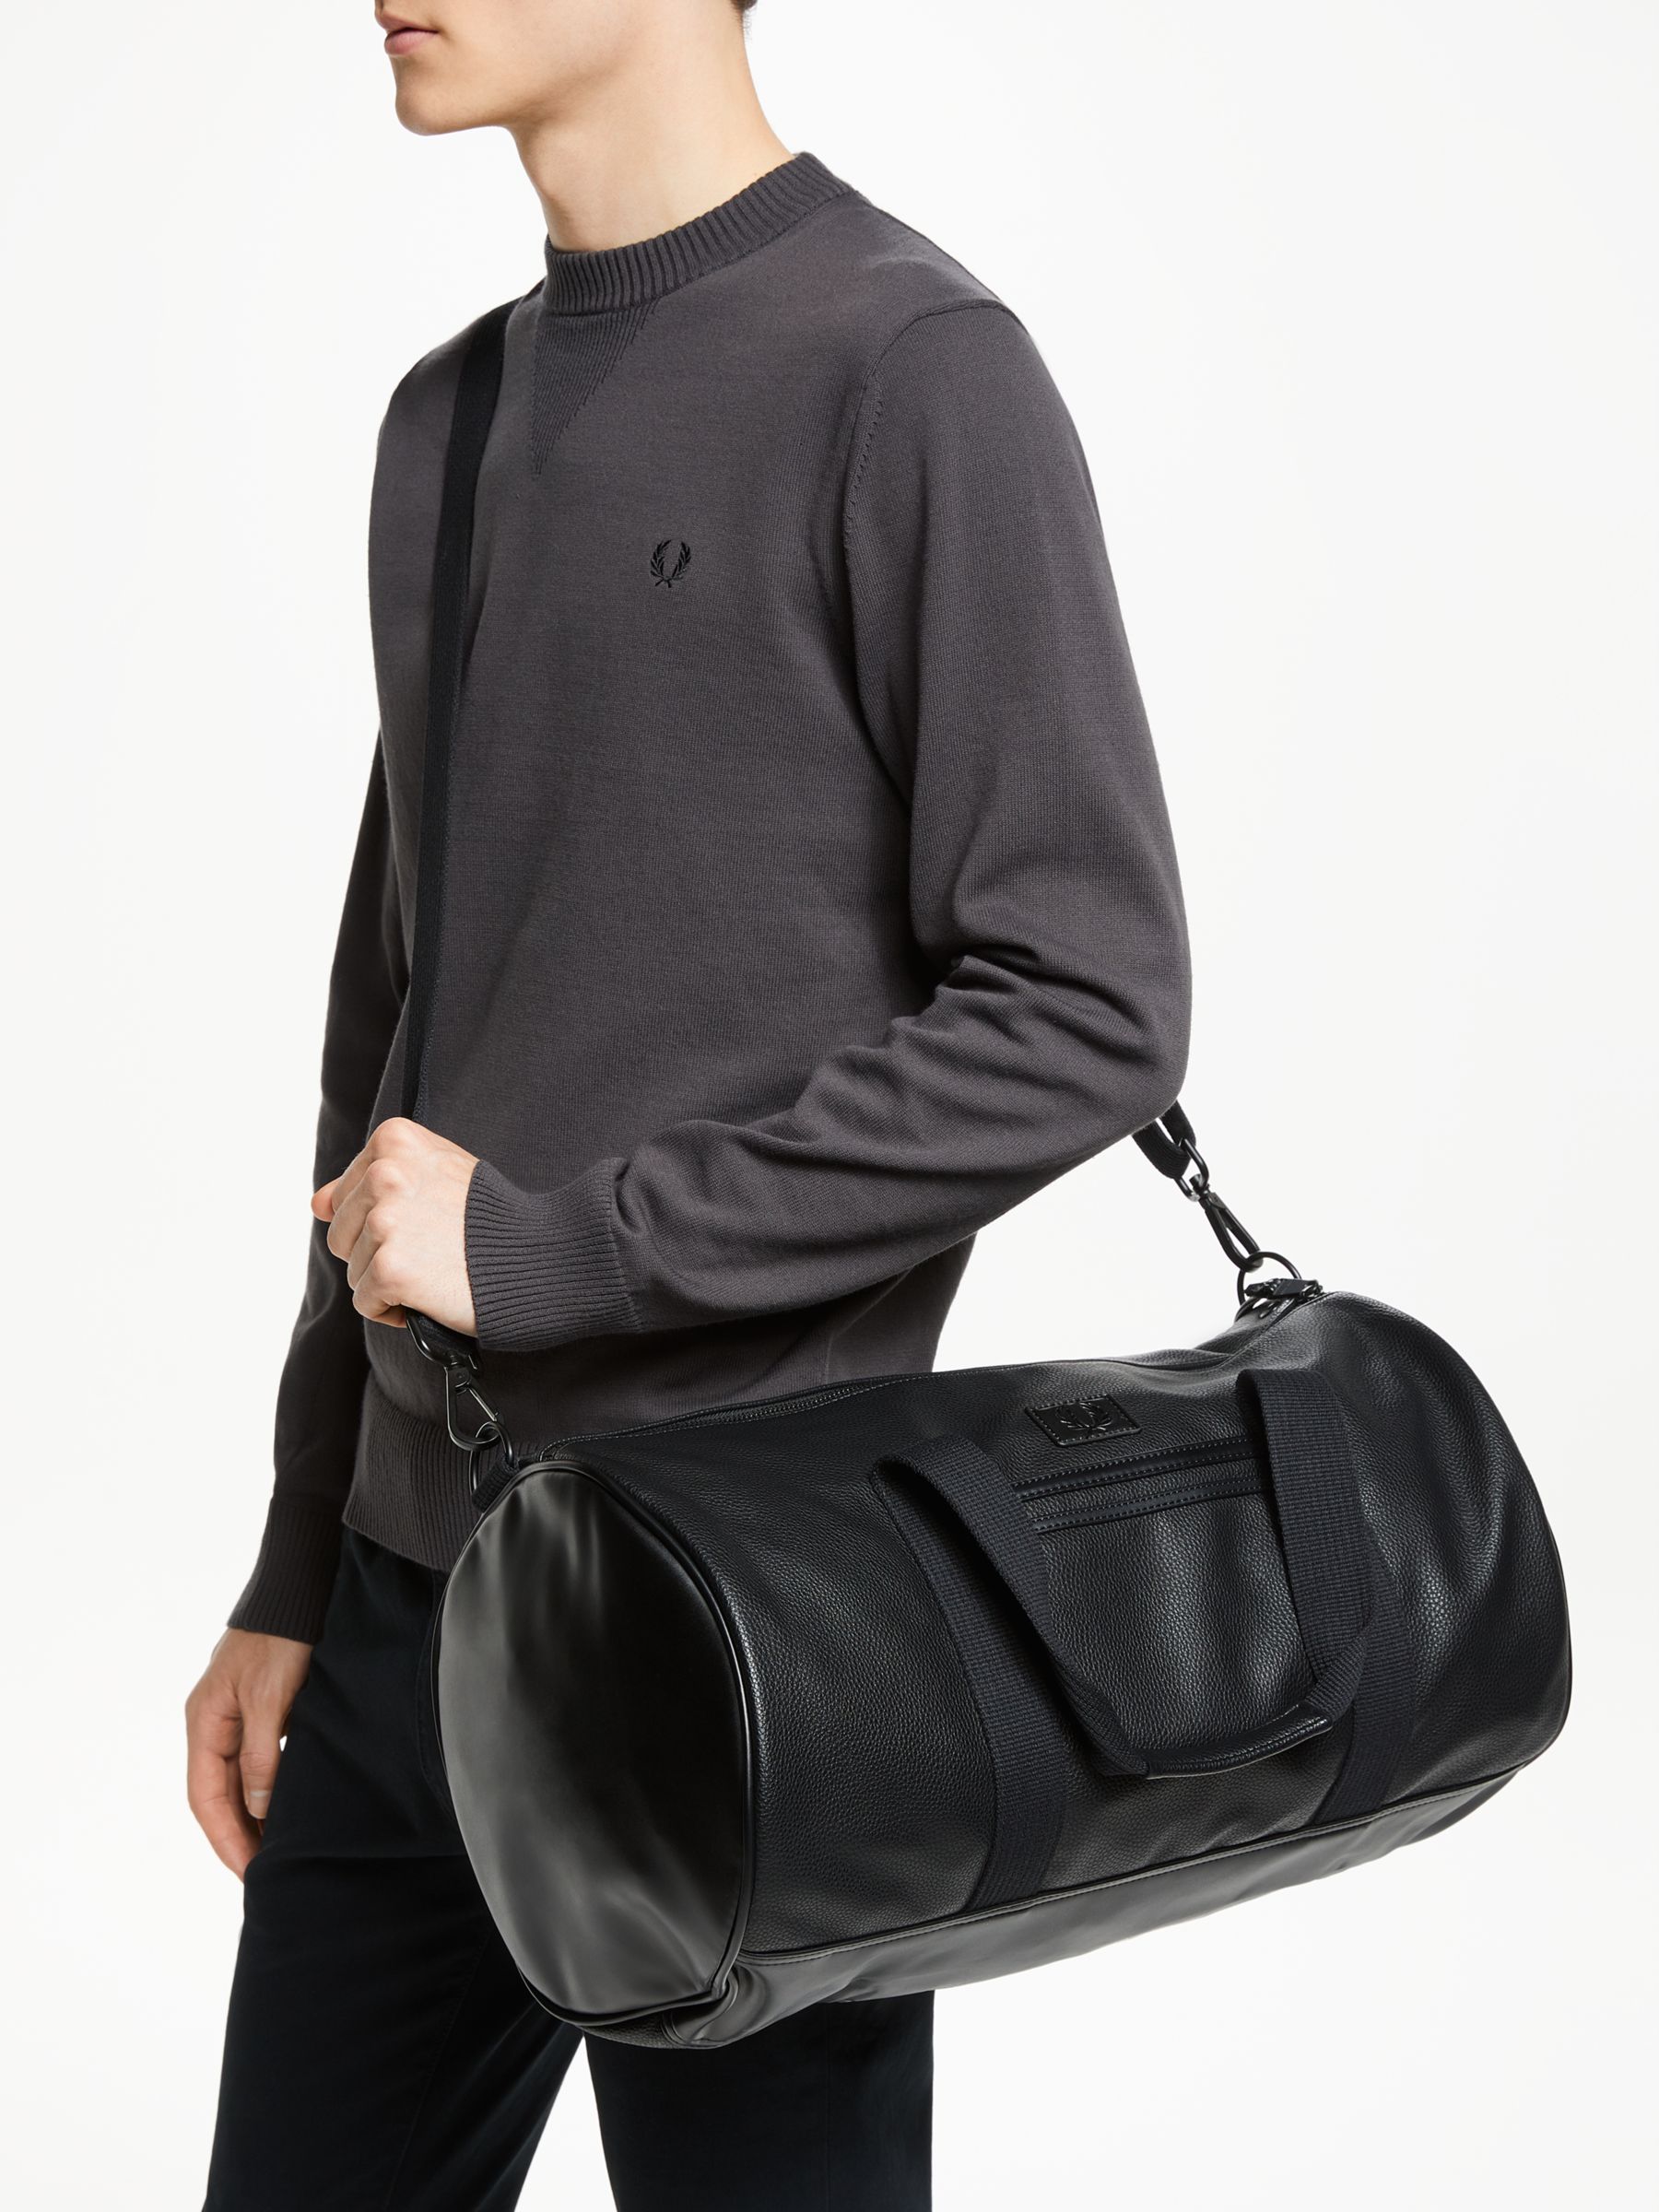 Fred Perry Tonal PU Barrel Bag In Black, Fred Perry Gym Bag Women's